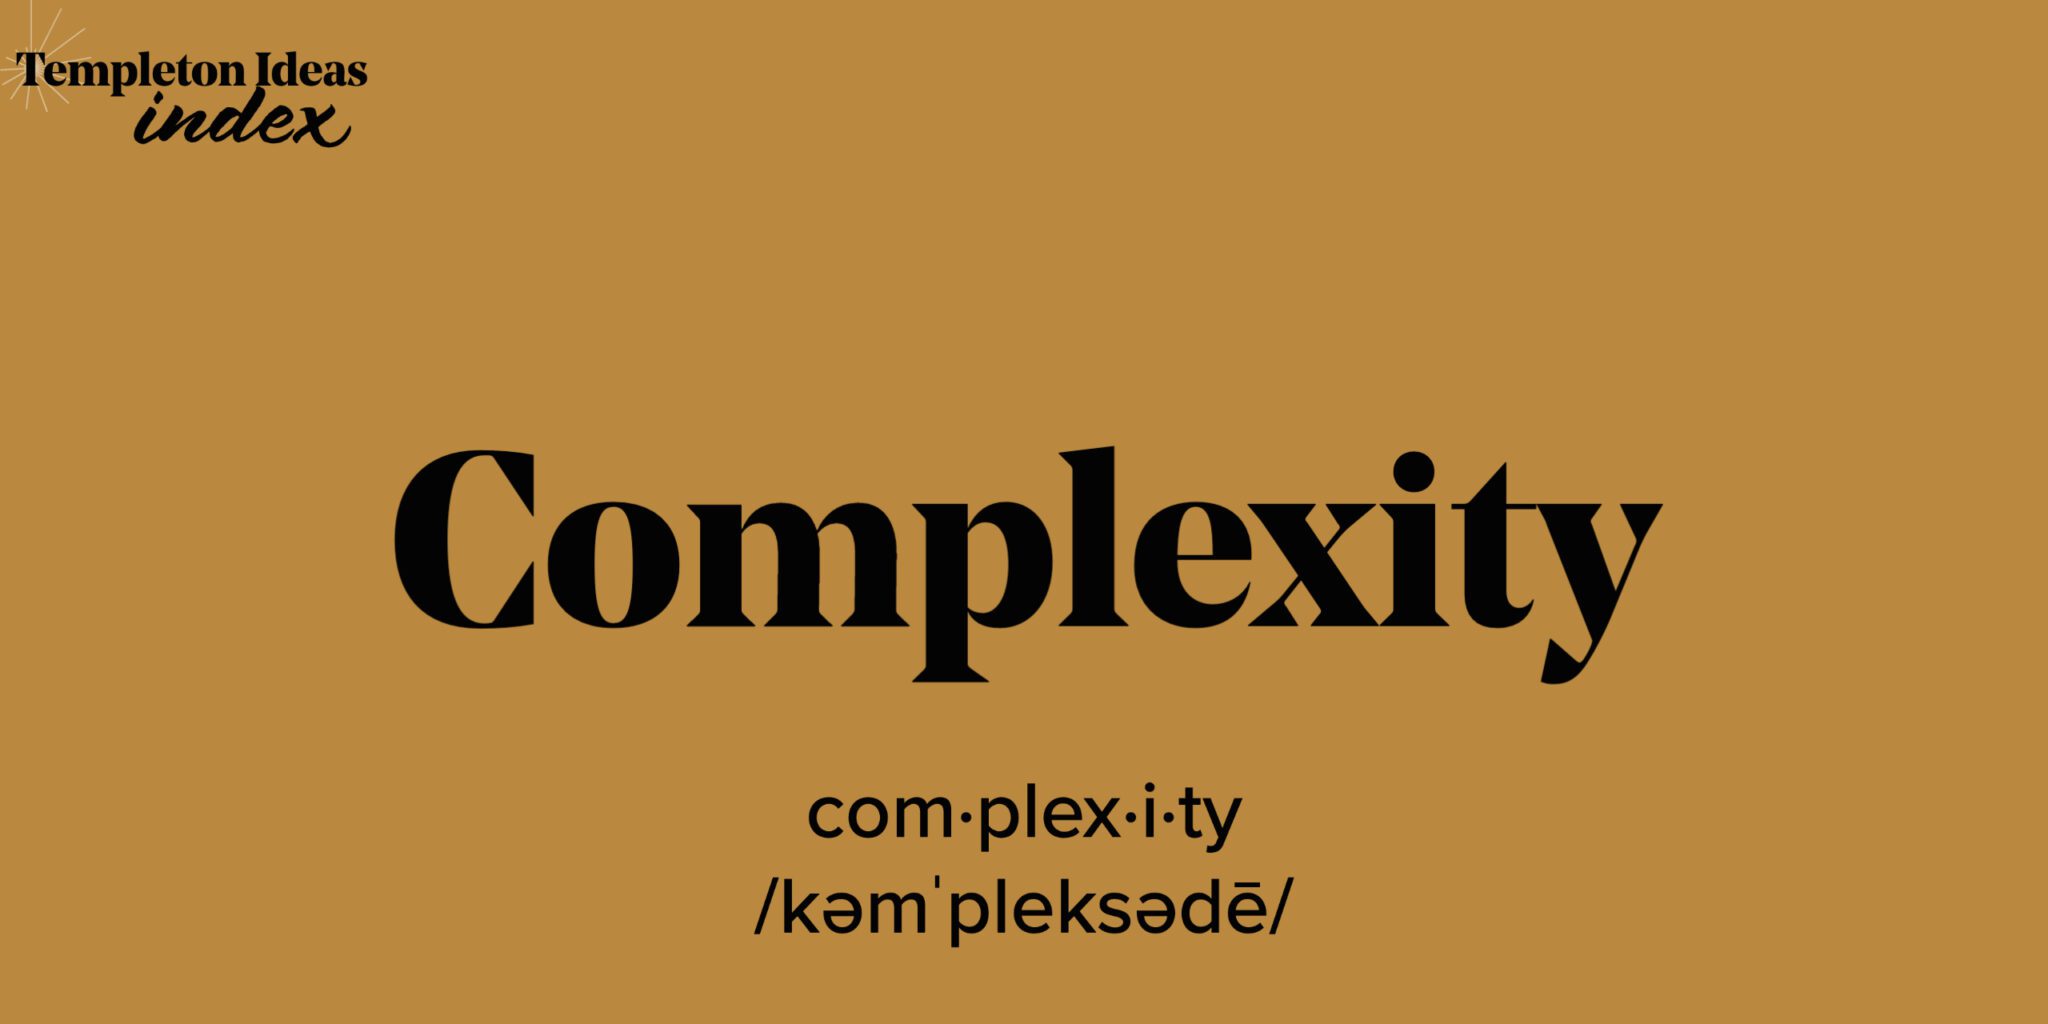 What Is Complexity?